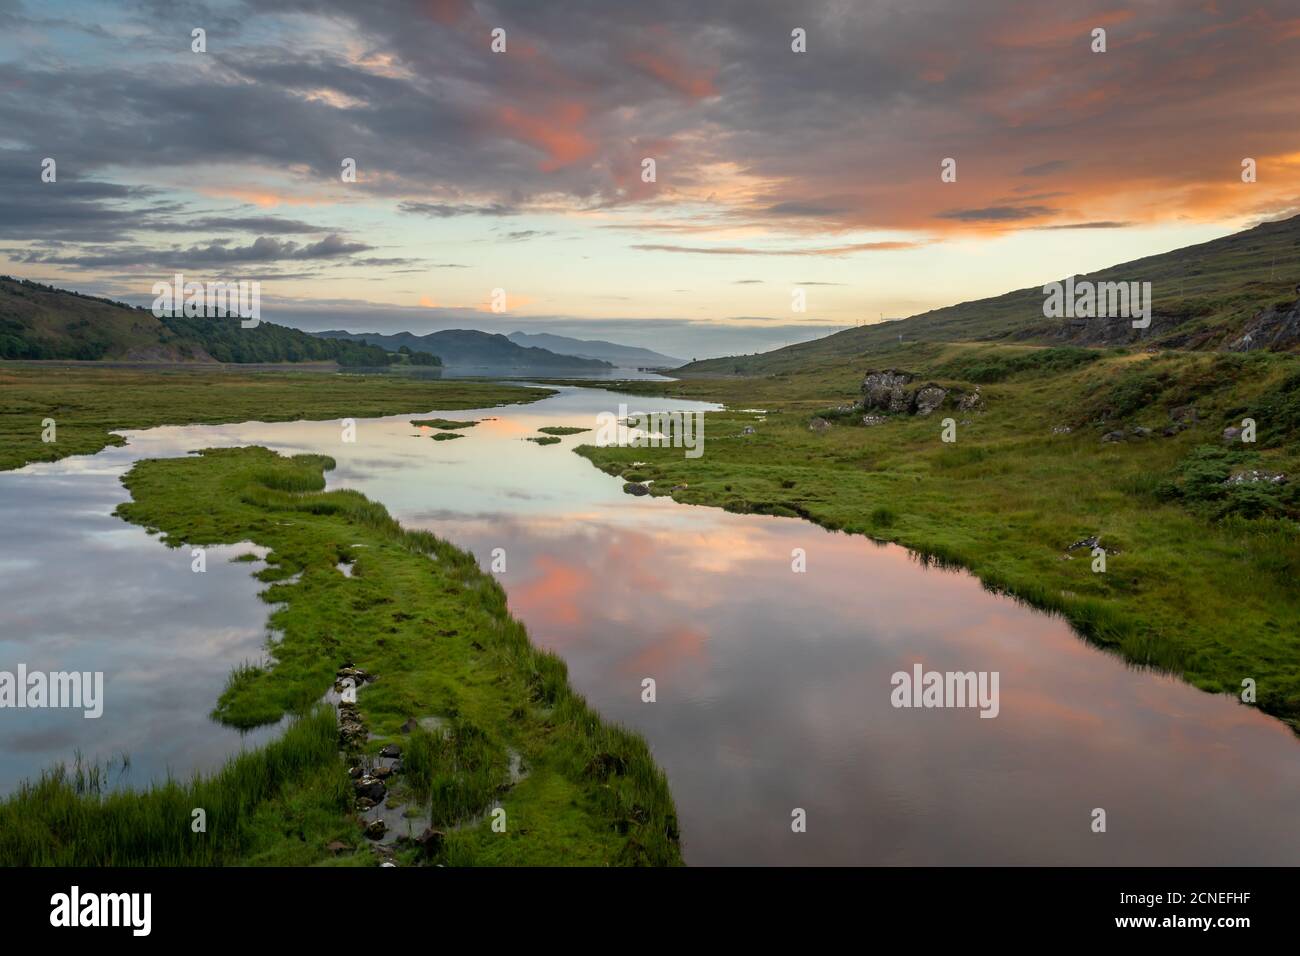 Sunset over Loch Kishorn and River Kishorn, Scotland Stock Photo